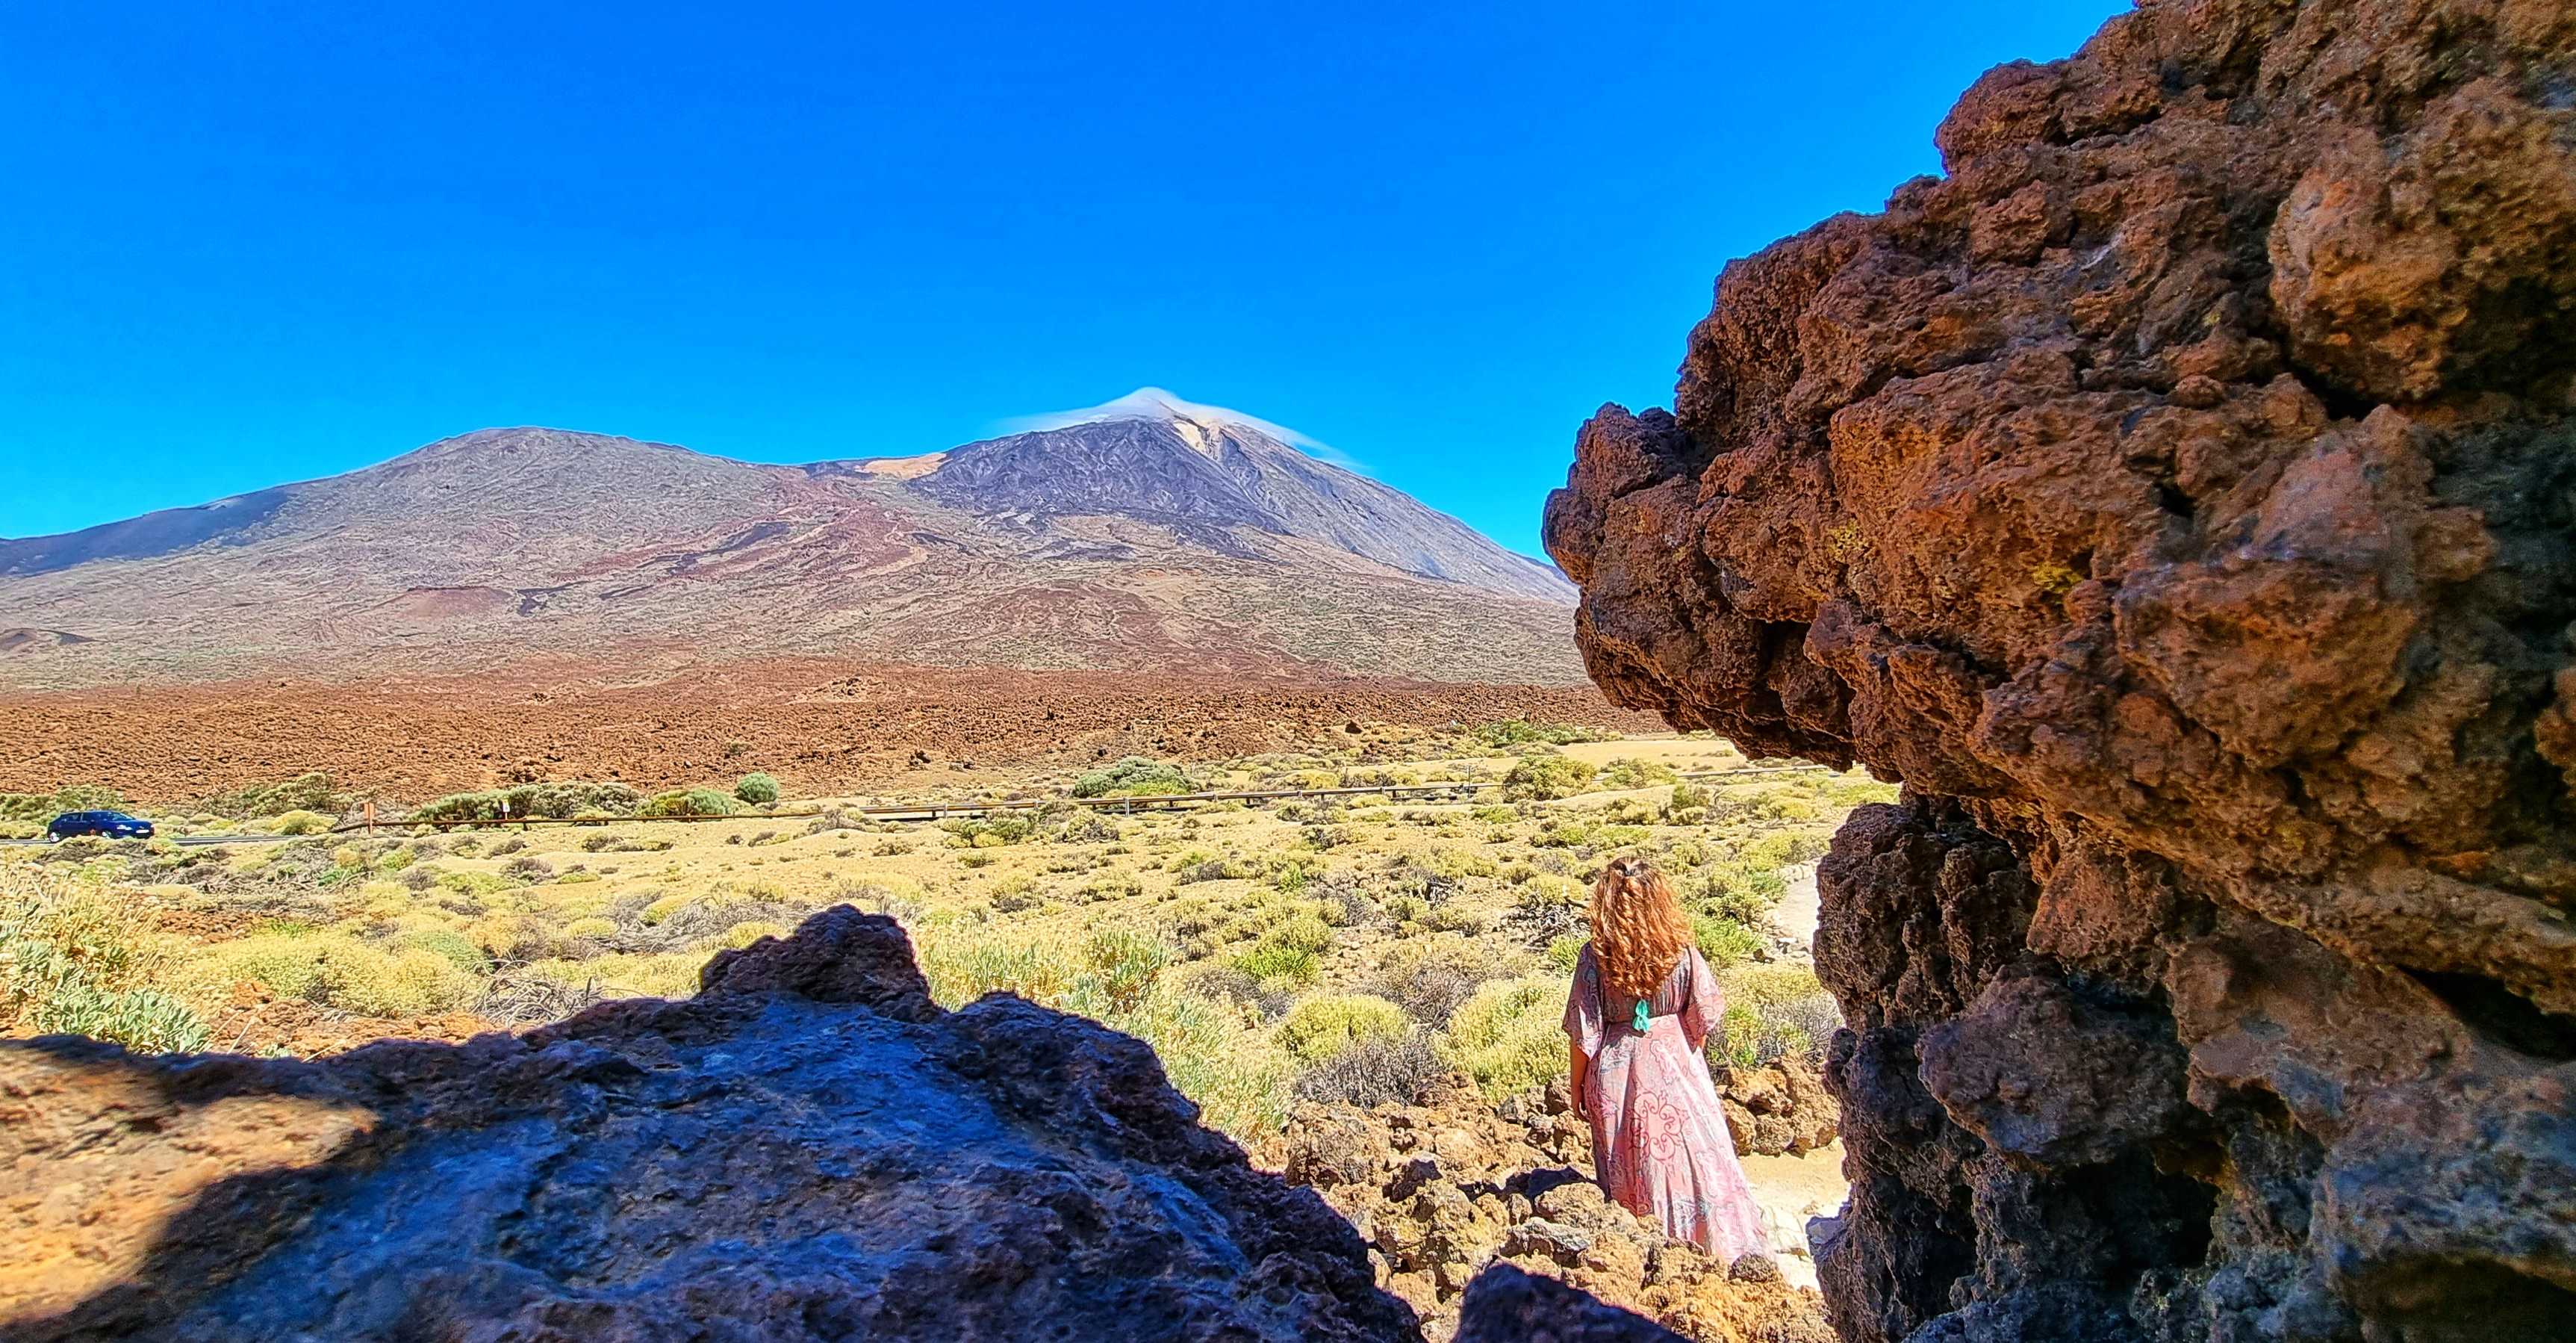 Tenerife: My Journey to the Island of Eternal Spring